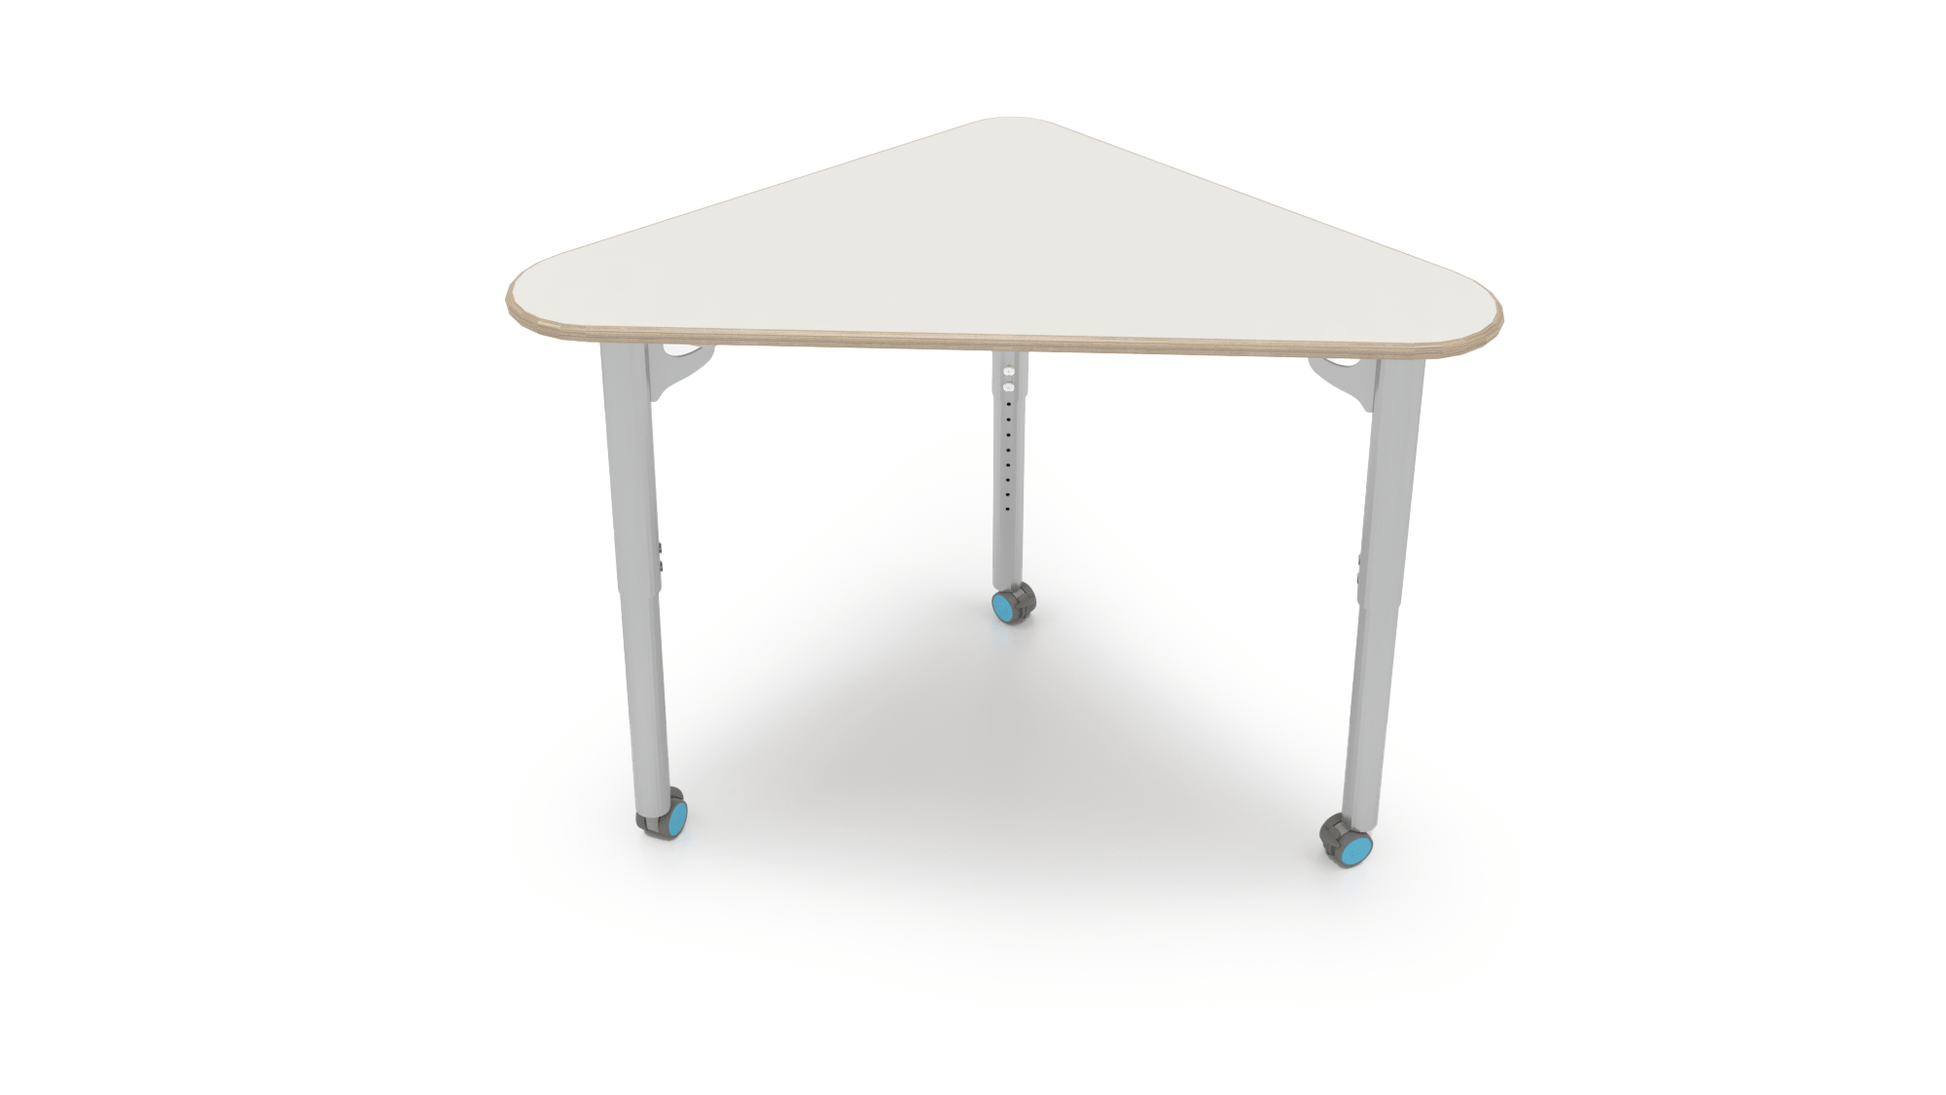 CEF ESTO Triangle Student Desk 41" x 25.25" High-Pressure Laminate Top on Baltic Birch and Adjustable Height Legs - SchoolOutlet